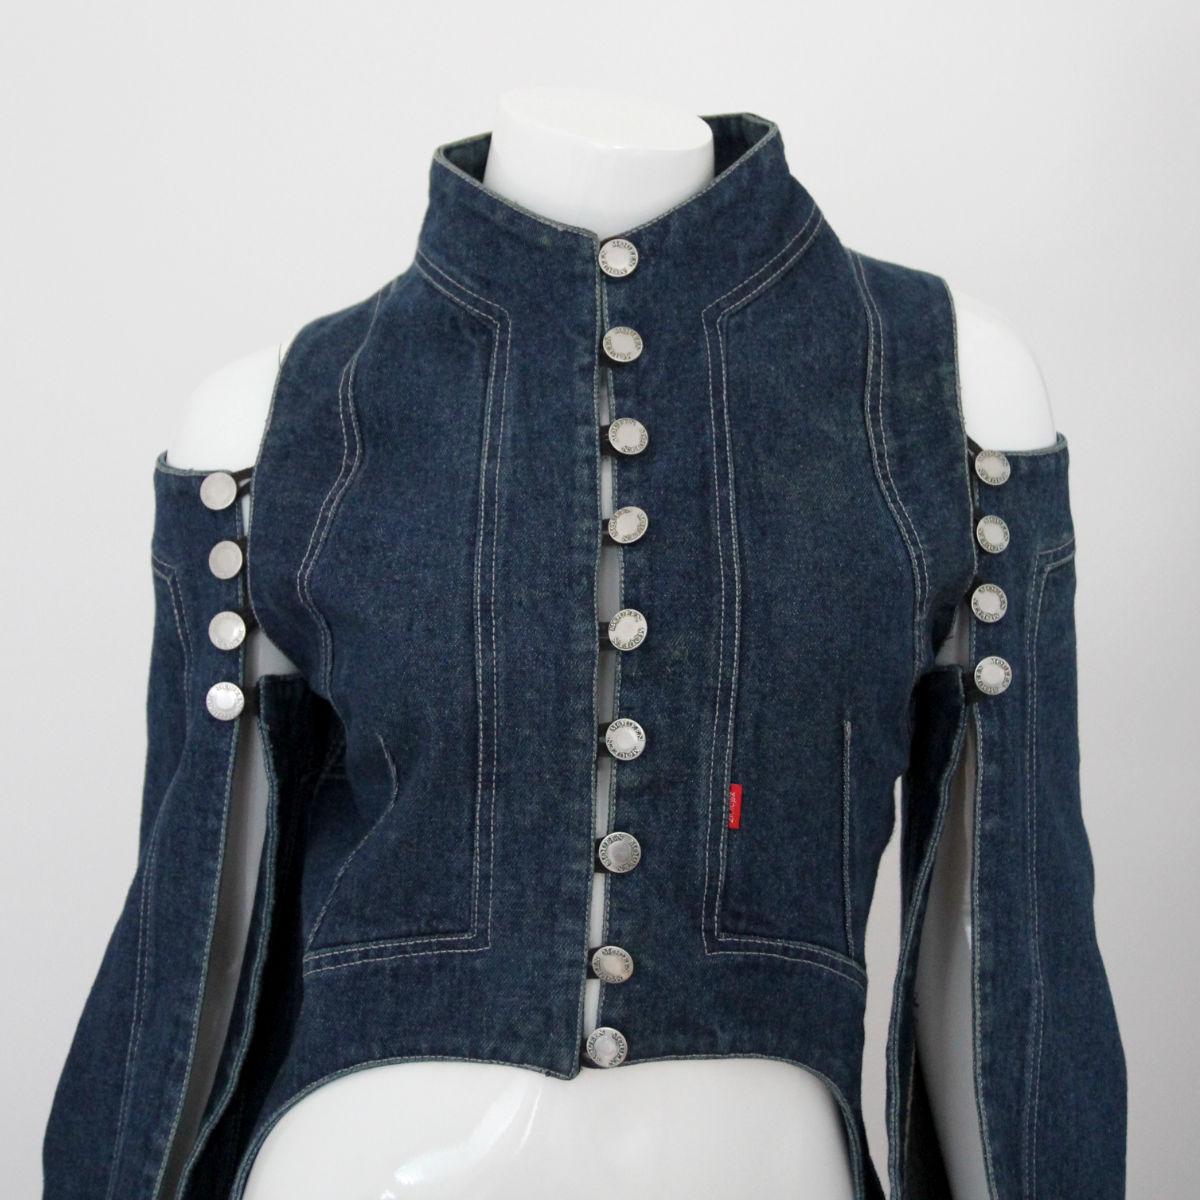 ALEXANDER MCQUEEN

2004. Fancy, uniquely cut denim jacket / denim coat or tailcoat by Alexander McQueen. 

Buy Now Or Cry Later!

The jacket is in very good condition.
Inner neck area minimally dirty.